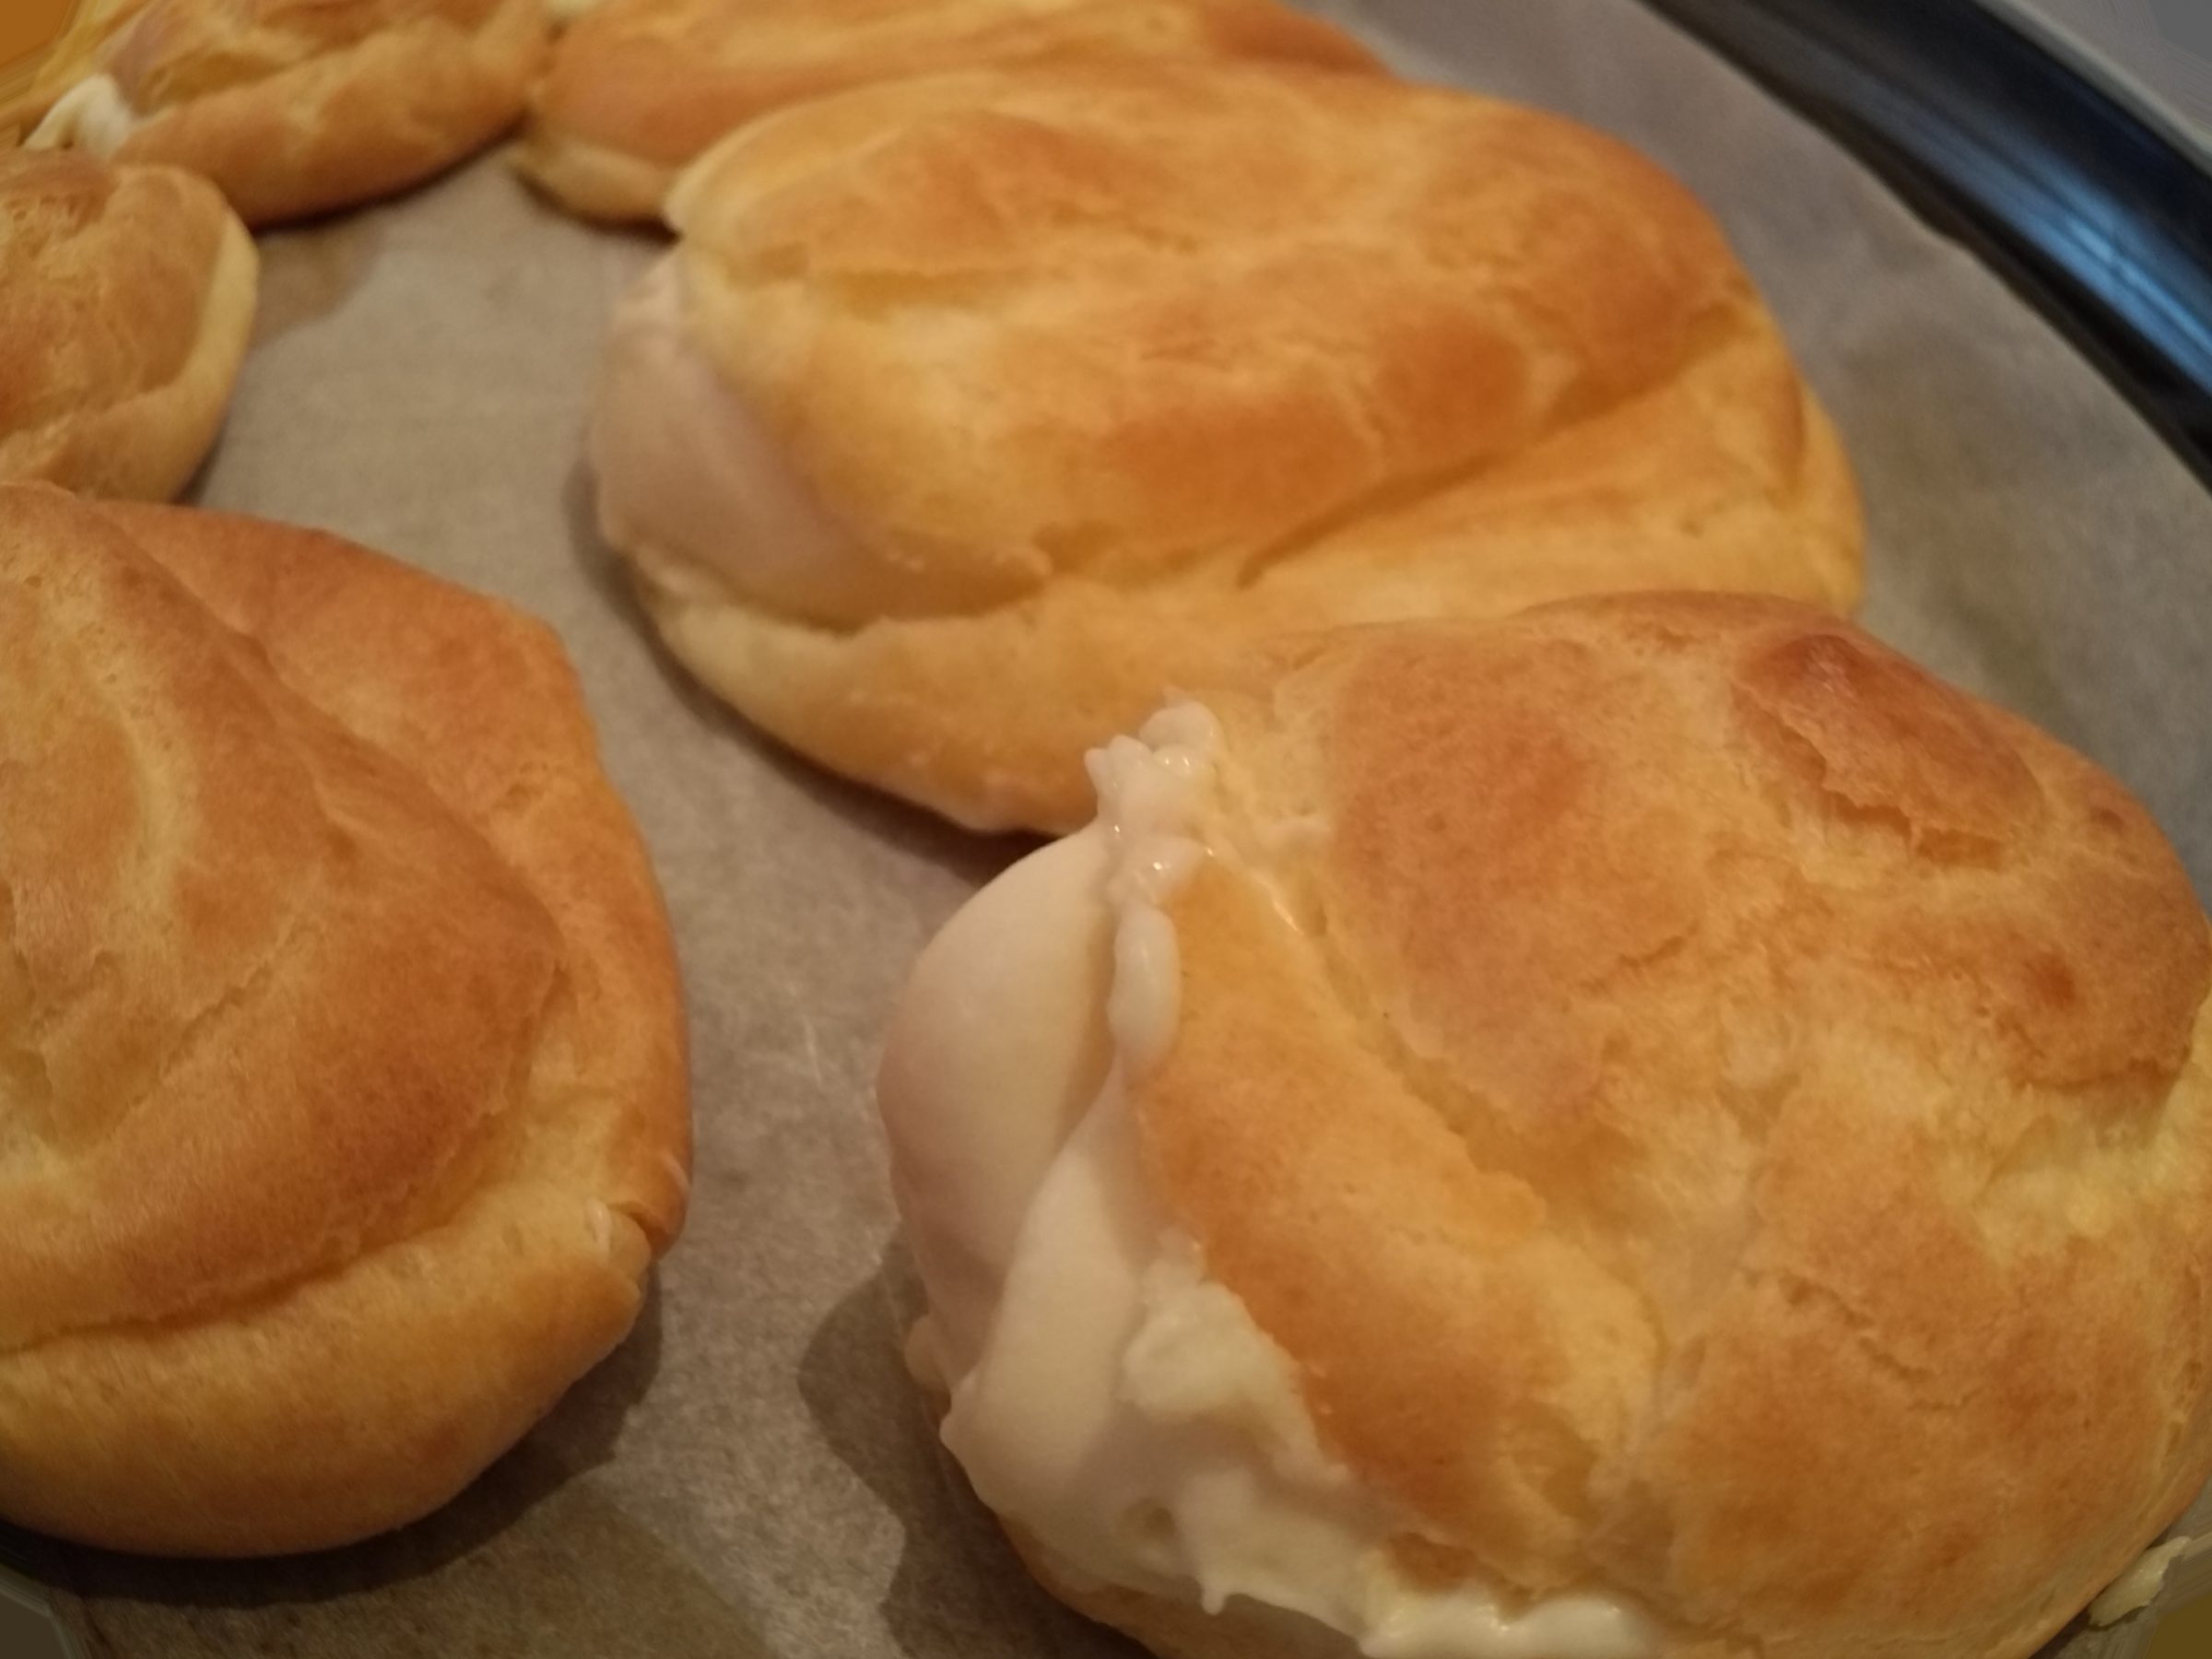 classic Cream puffs with a crispy hollow shell and smooth diplomat cream